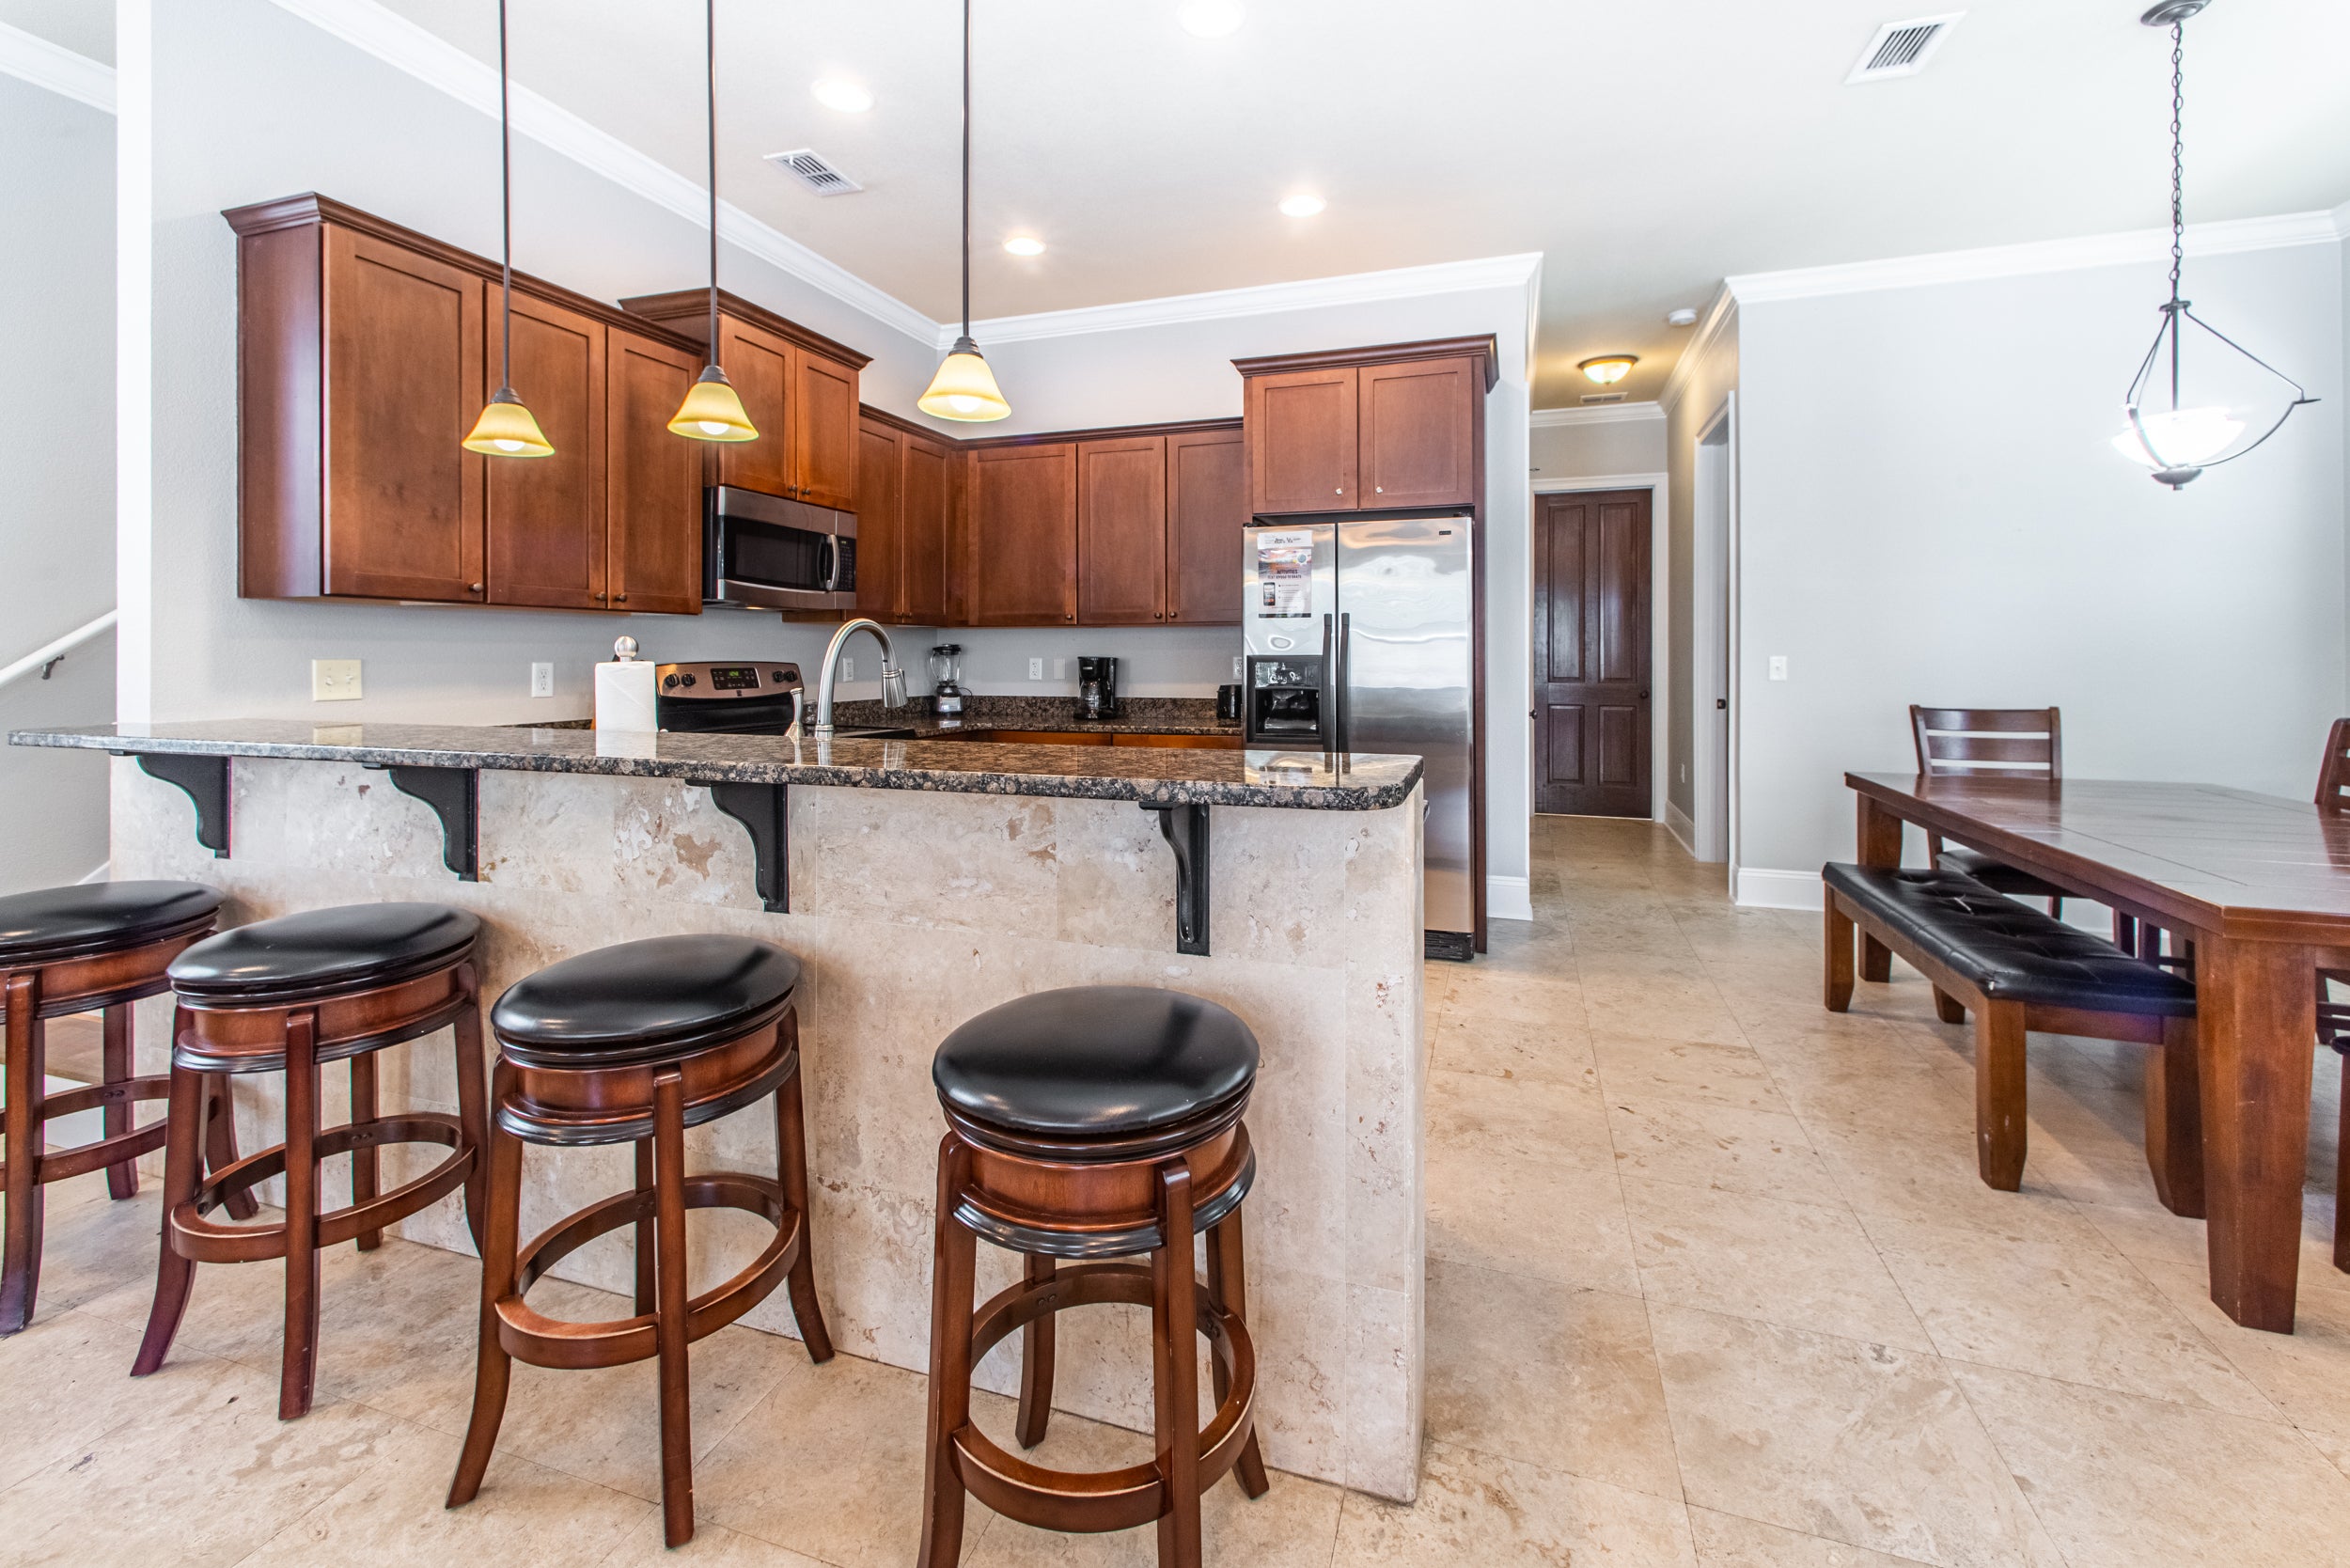 Granite counter tops and open kitchen space